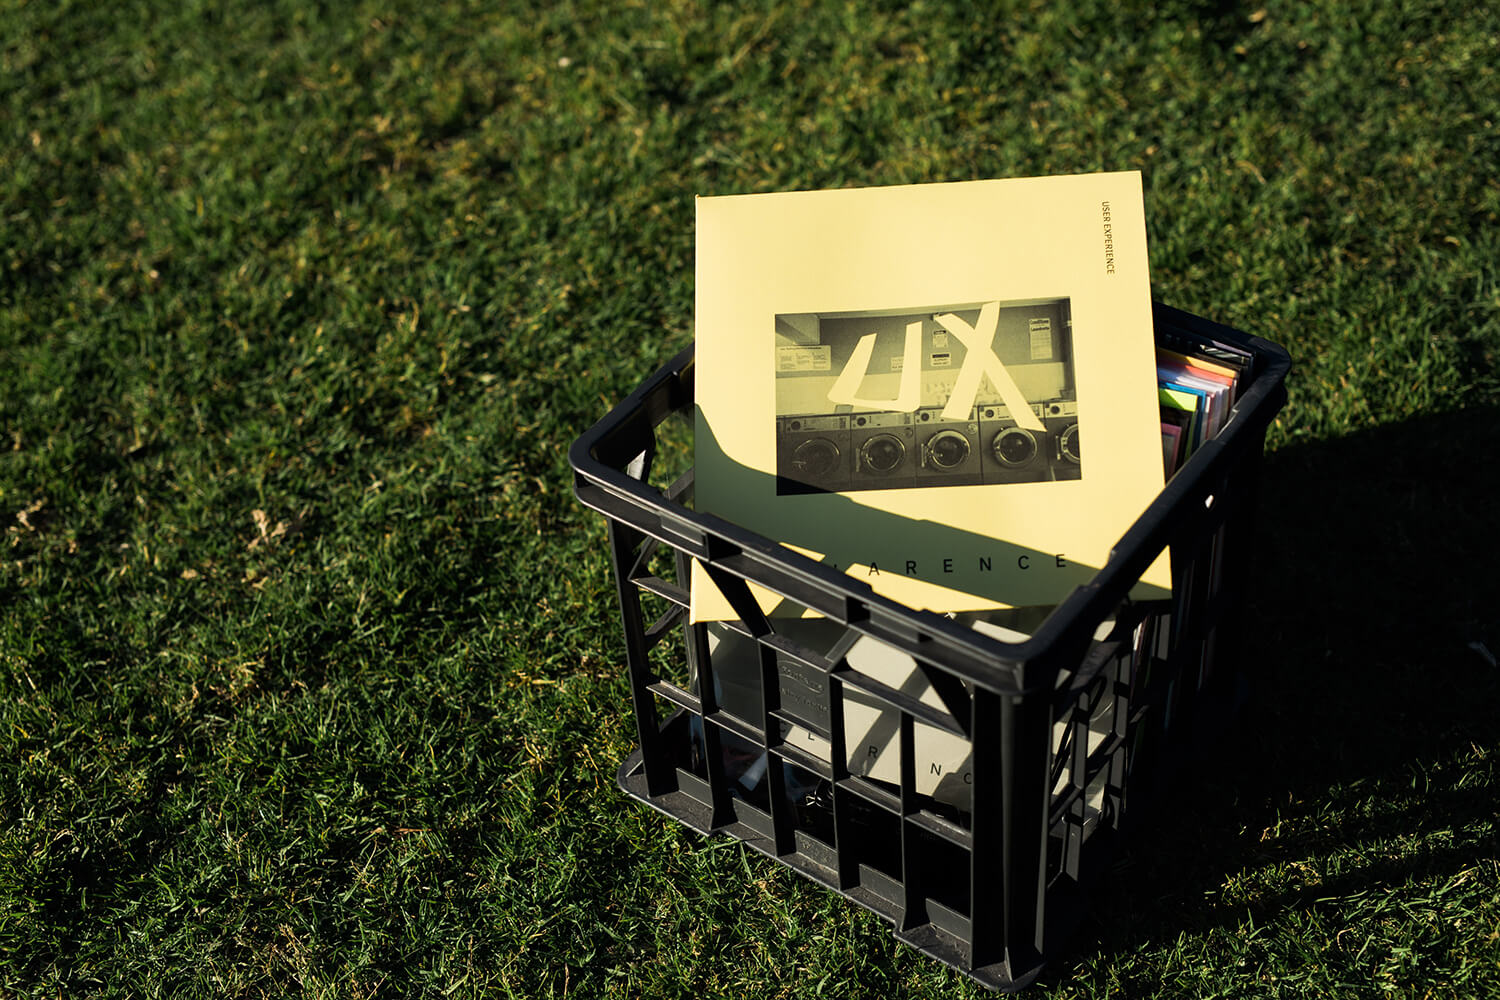 Crate of records in a field